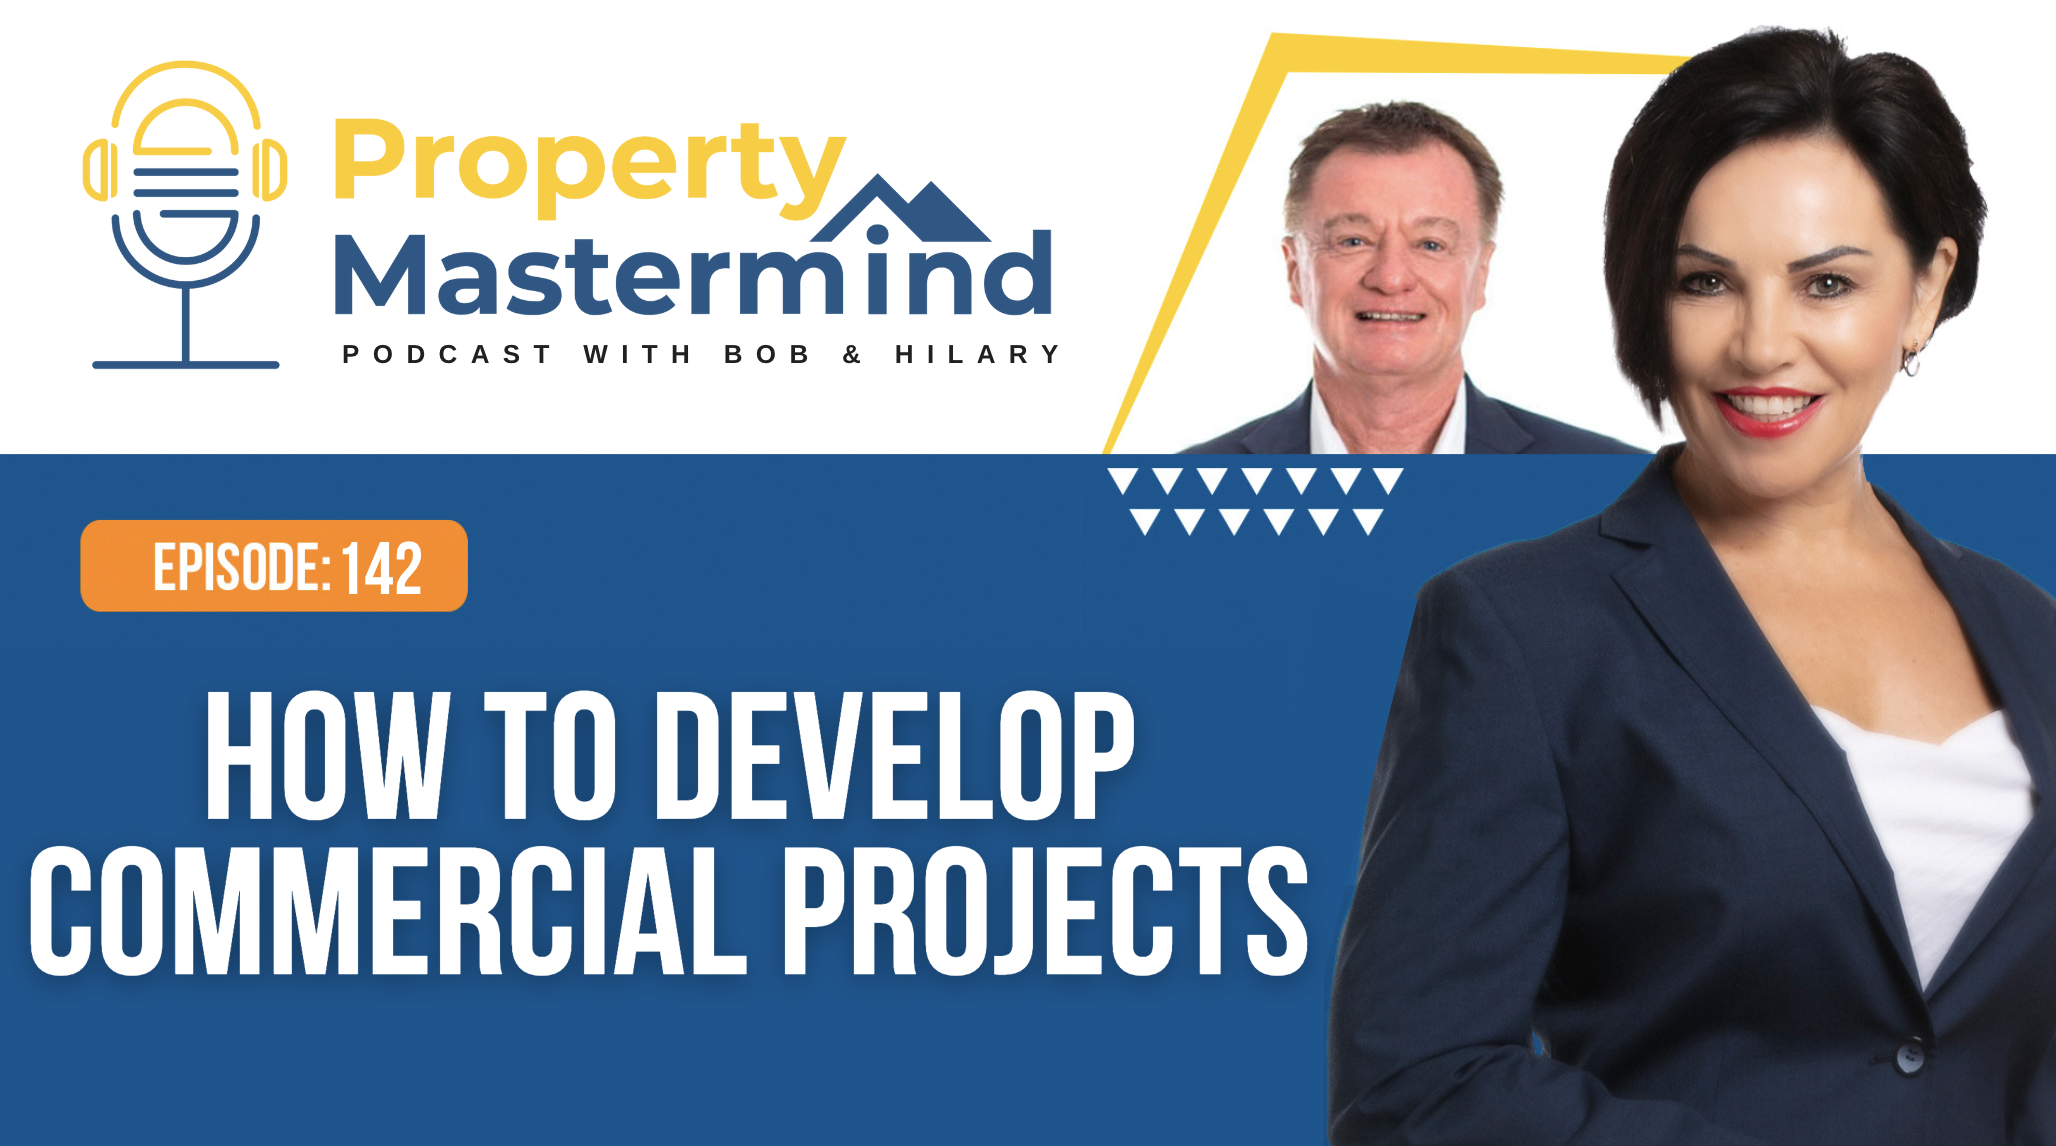 EP 142: How To Develop Commercial Projects